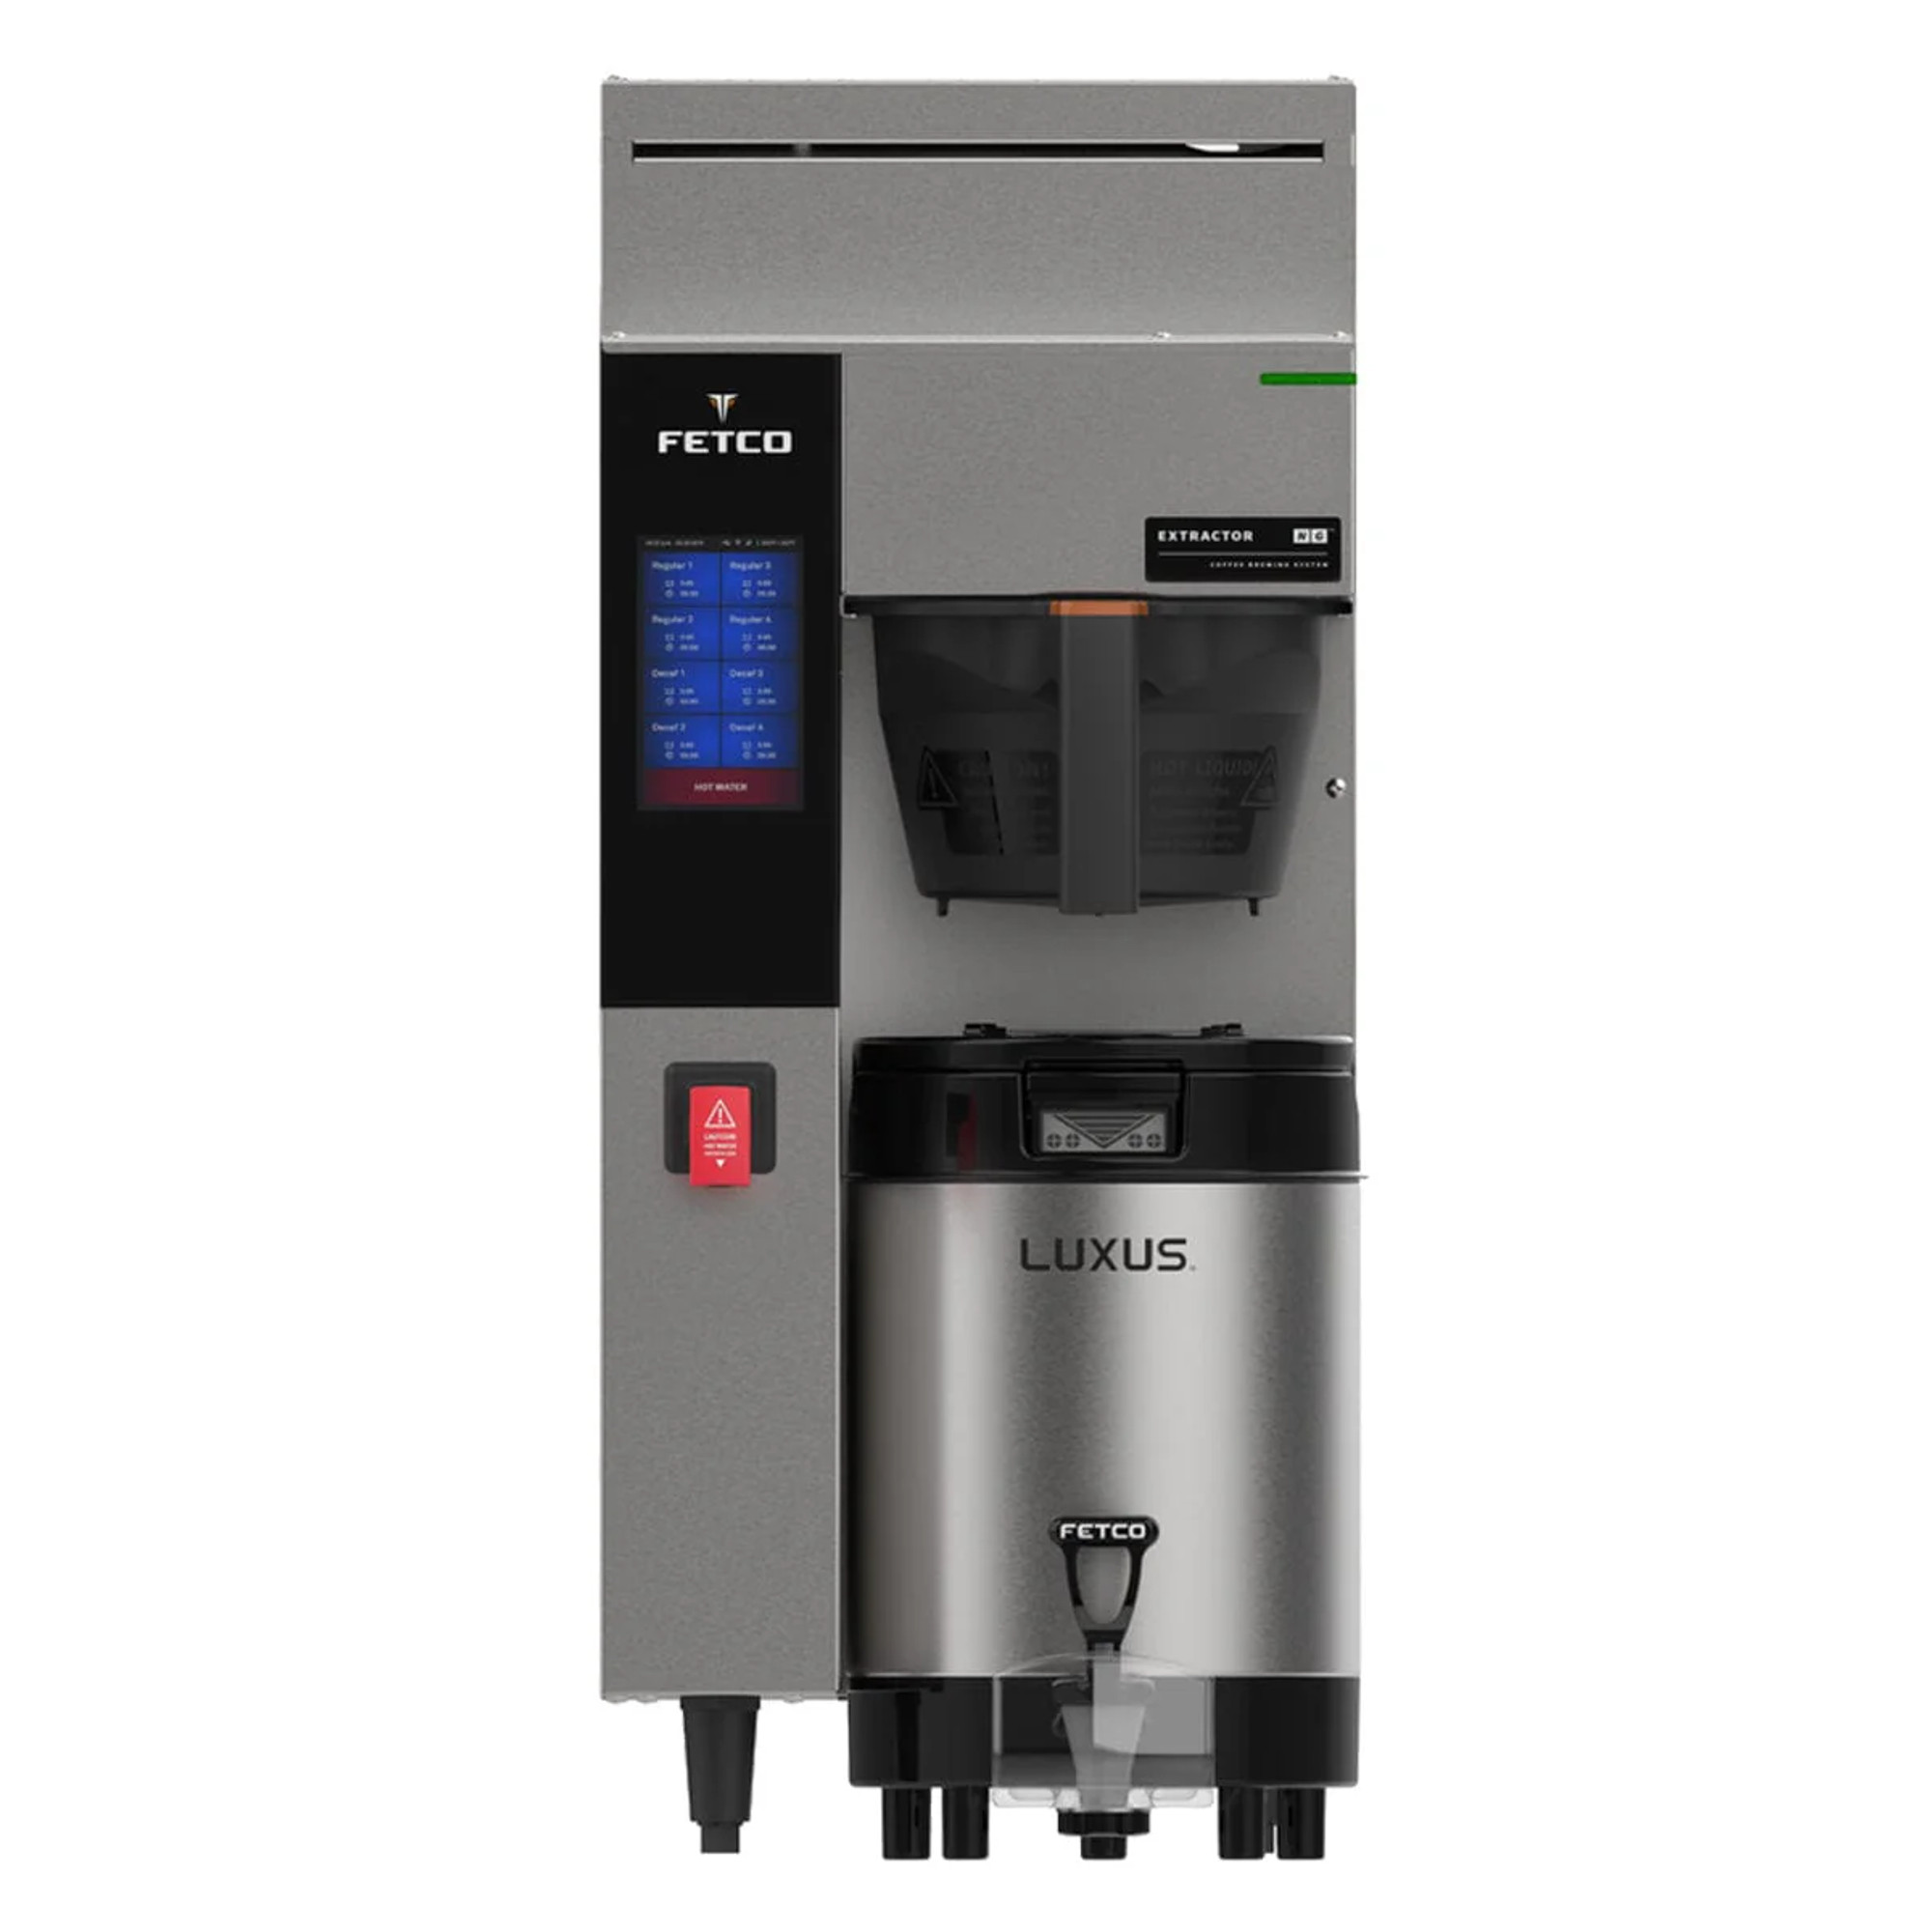 Fetco CBS-2231 NG 1 Gallon Single-Station Coffee Brewer